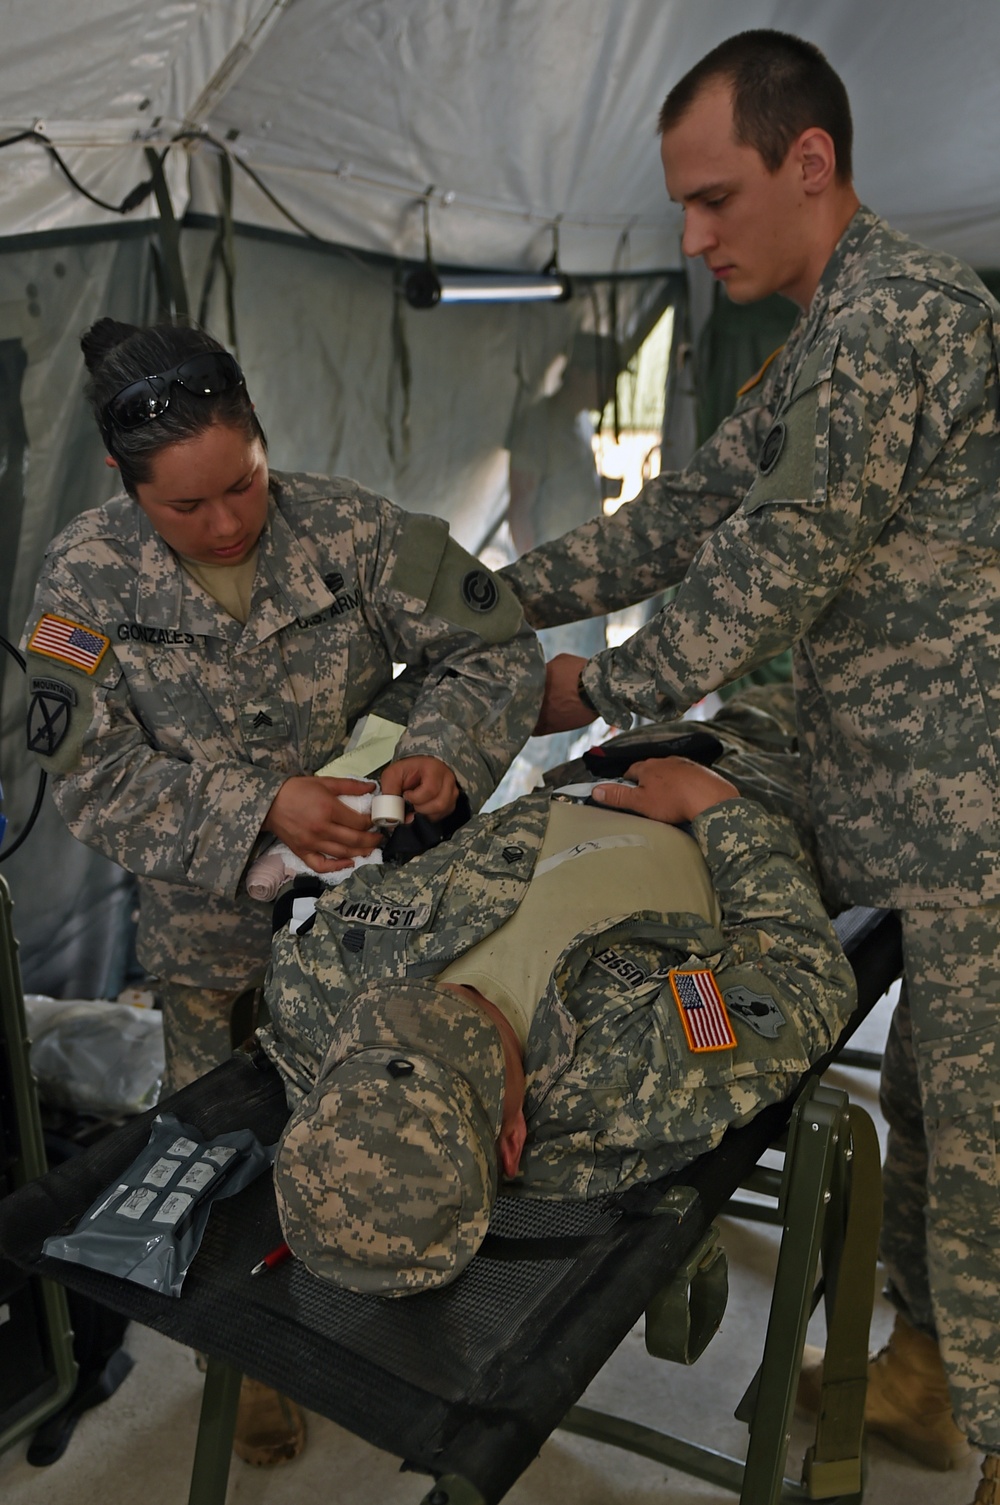 Beyond the Horizon, Guatemala 2016: Medics participate in joint readiness exercise